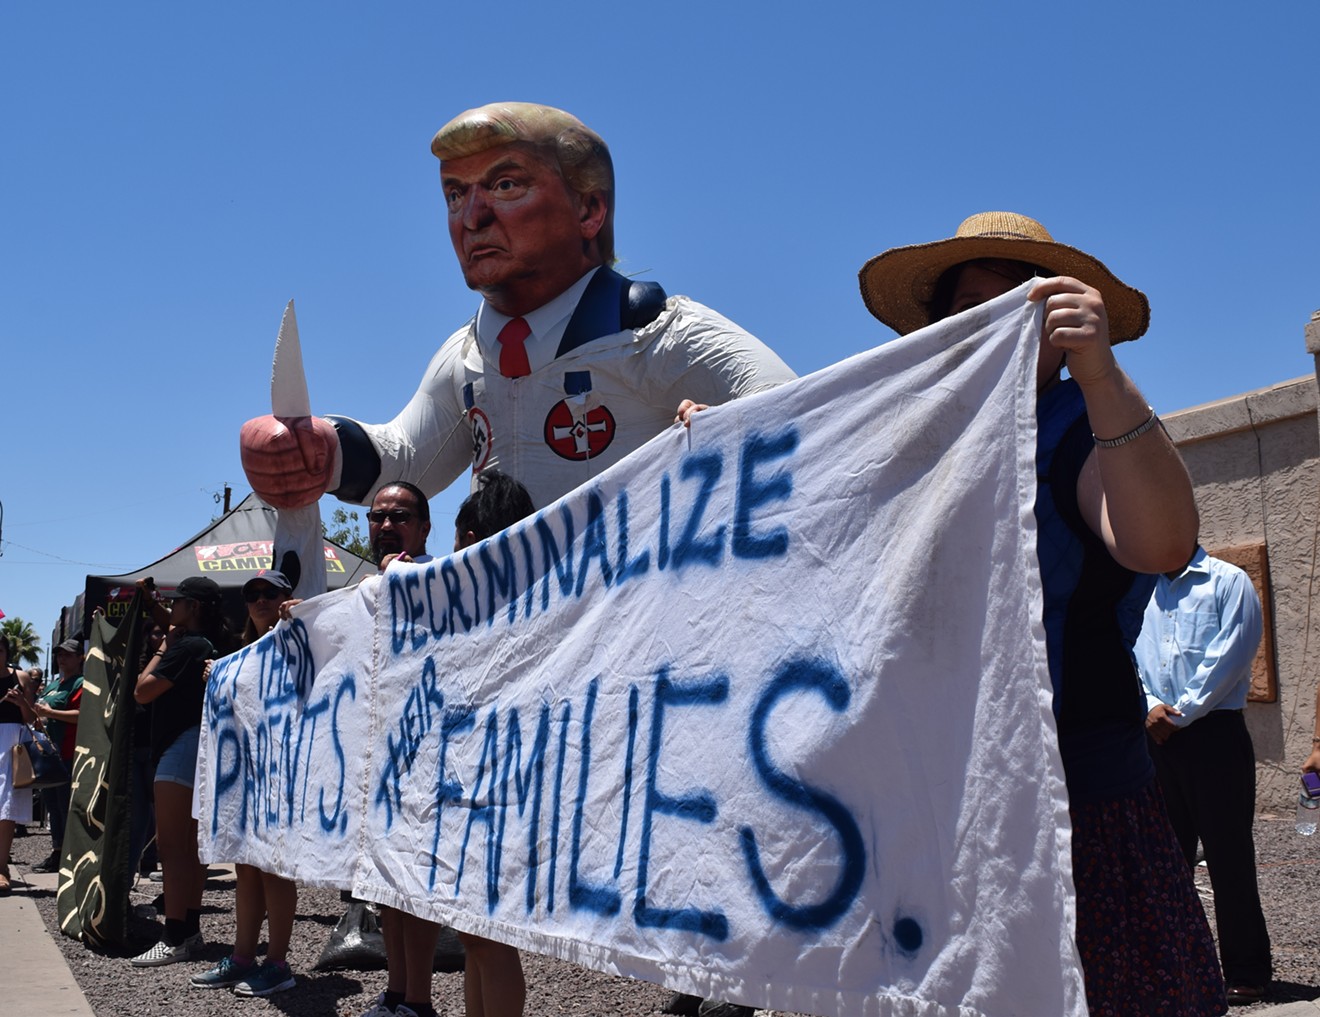 Demonstrators protested outside of a Southwest Key shelter for migrant kids in Phoenix as First Lady Melania Trump visited the shelter on Thursday.